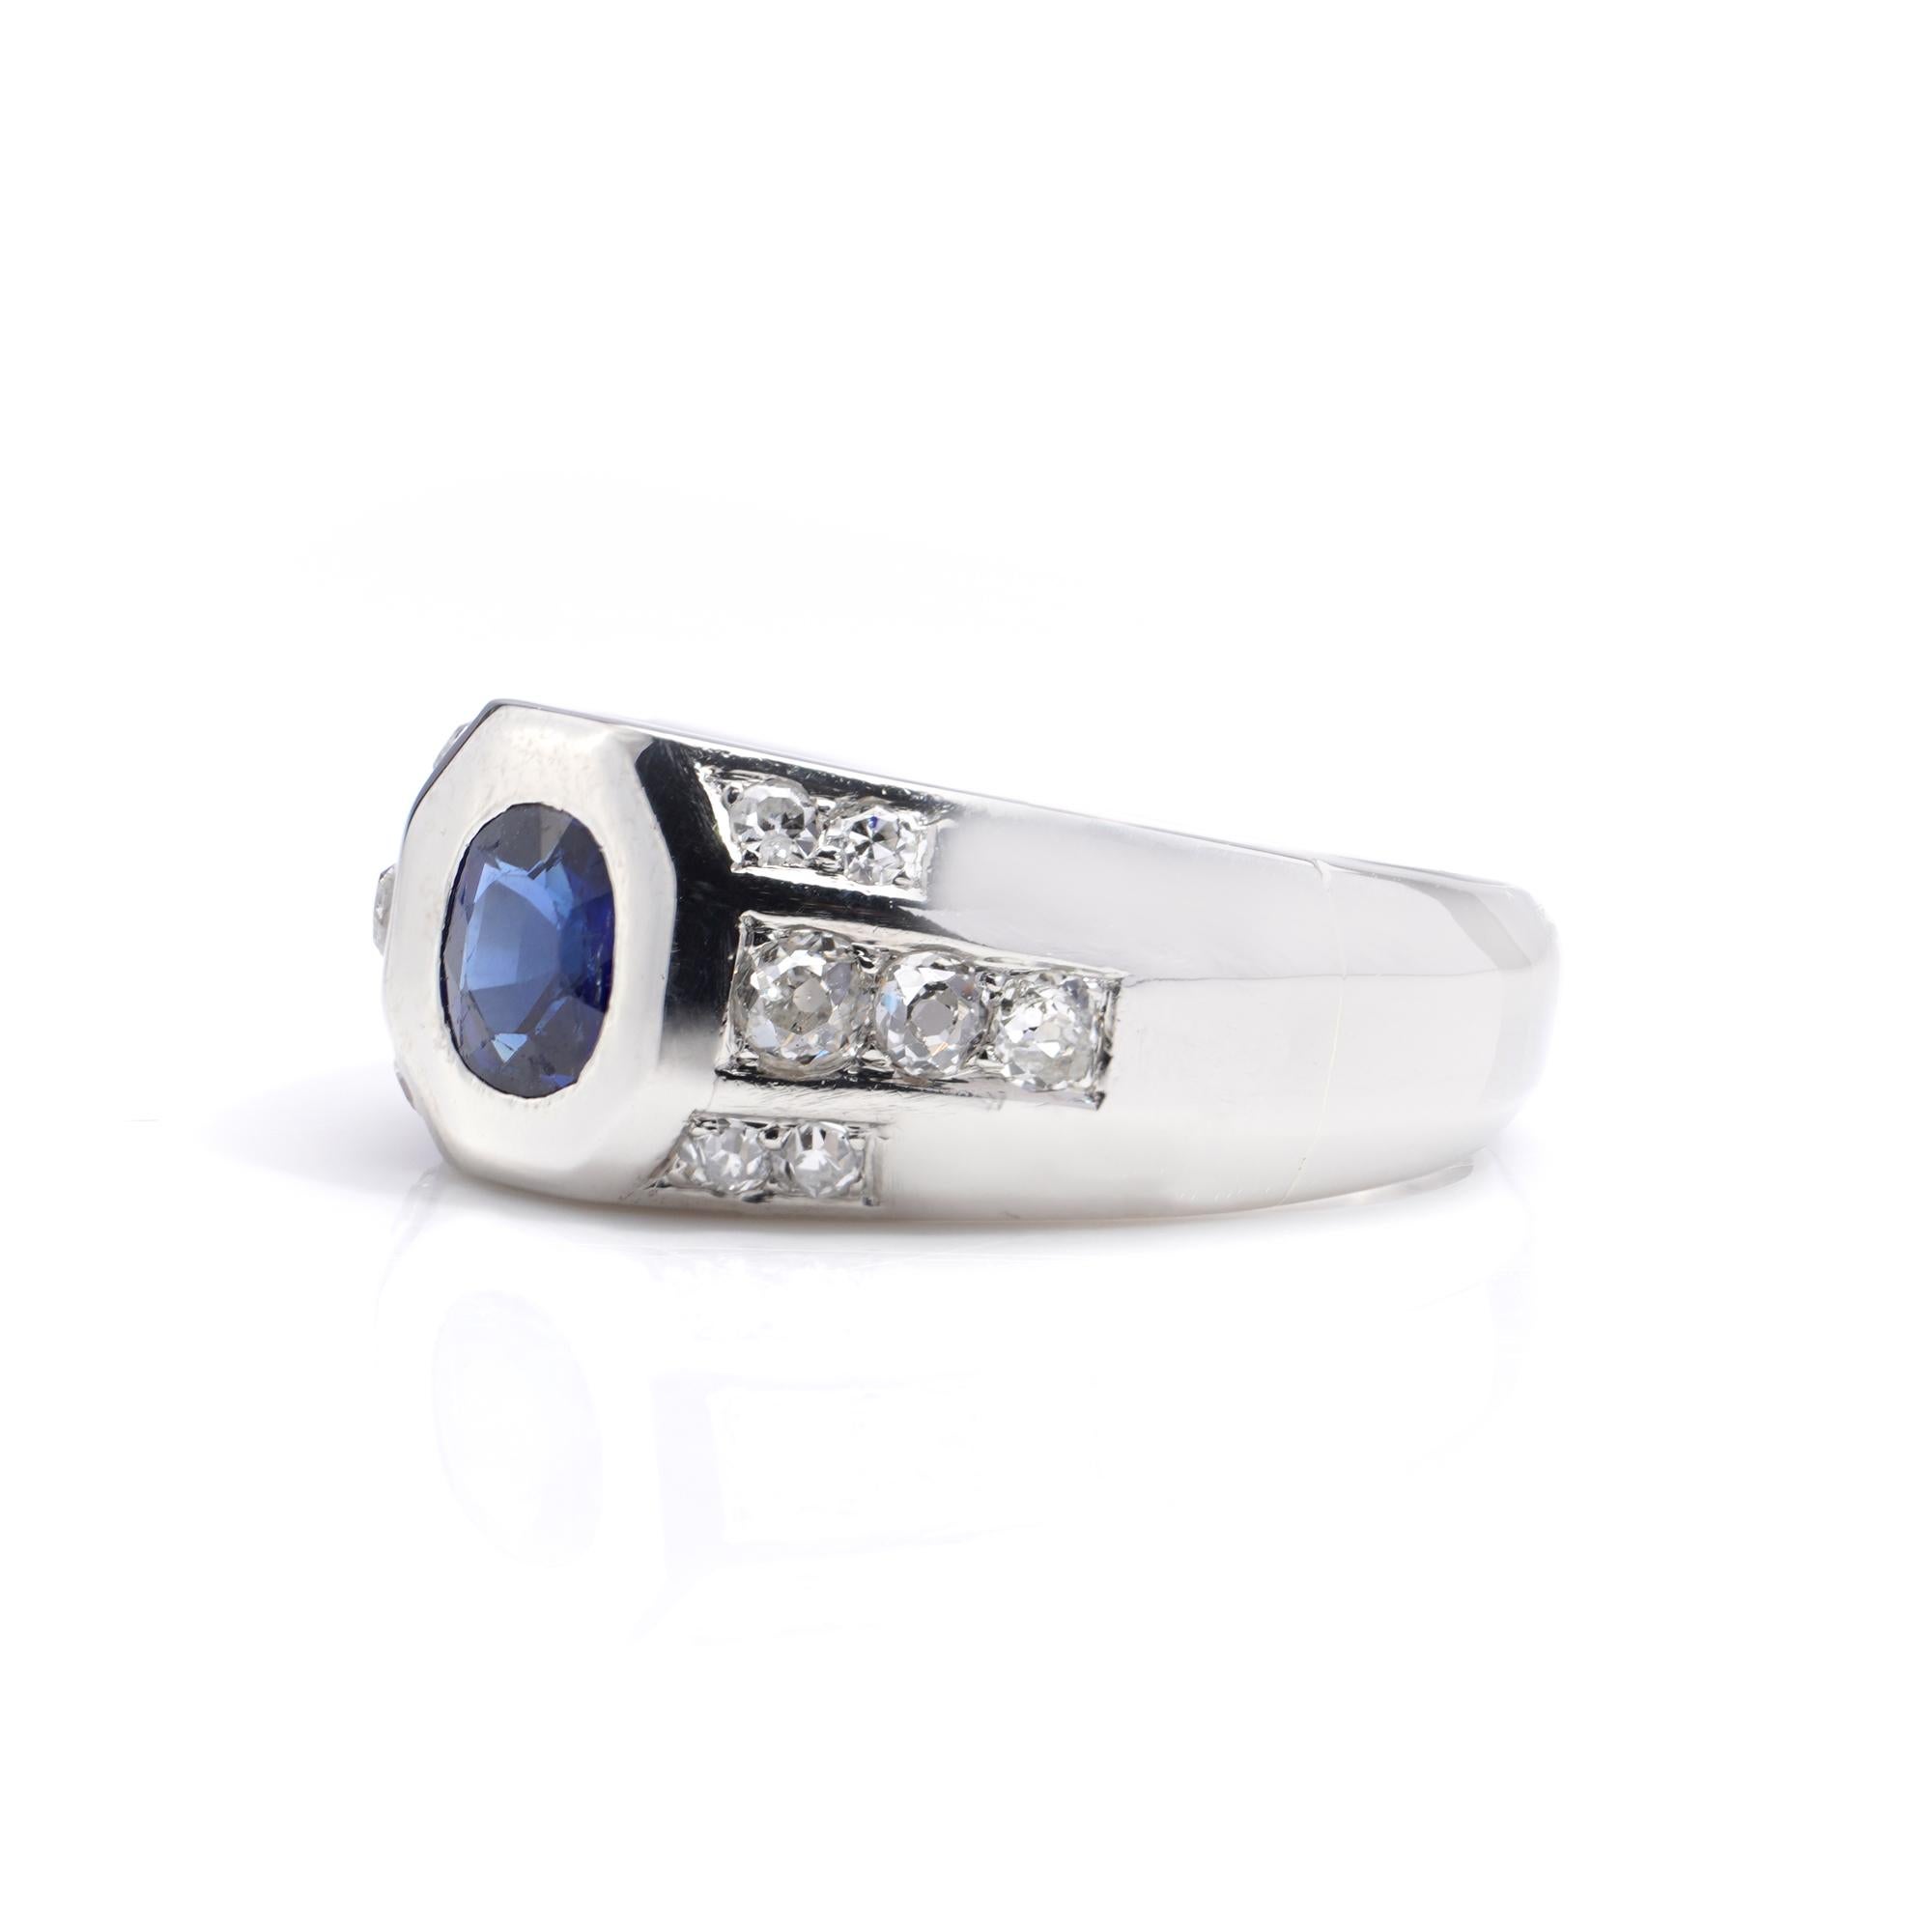 Platinum men's ring with blue sapphire and old-cut diamonds In Good Condition For Sale In Braintree, GB